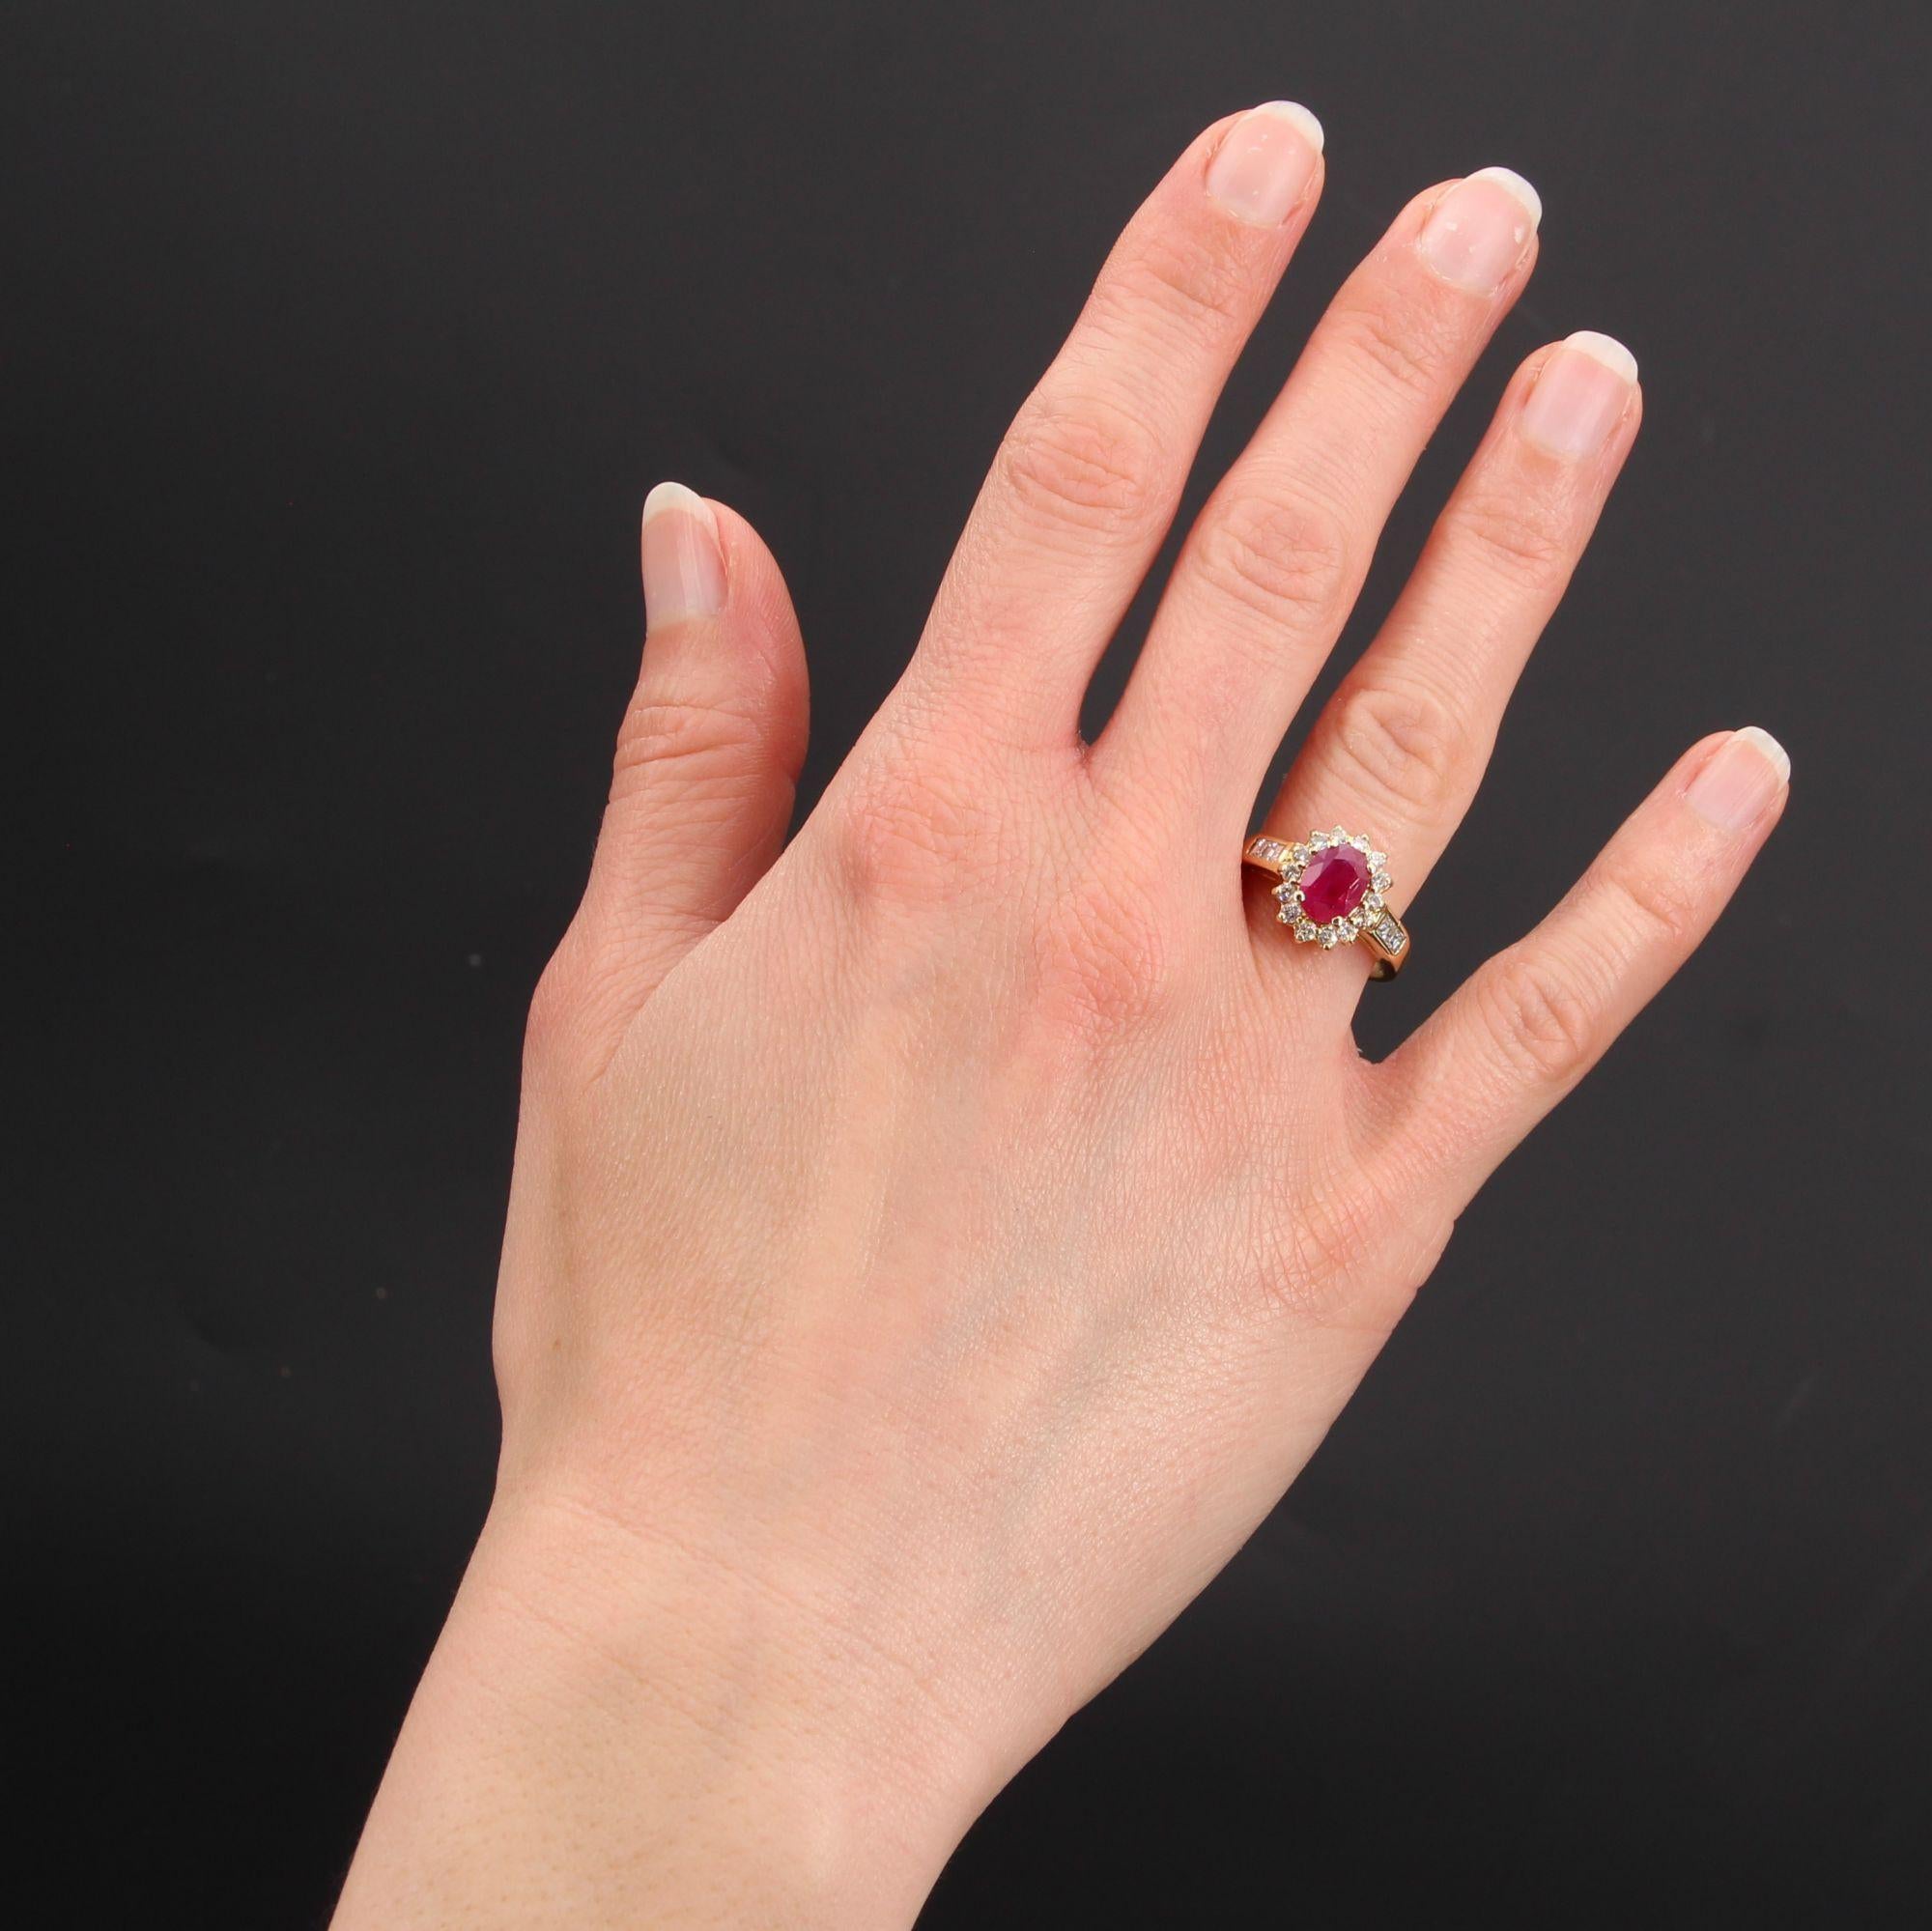 Ring in 18 karat yellow gold.
This second- hand ring is decorated with a treated oval ruby set with 4 claws, on a surround of brilliant- cut diamonds. On either side of the head, the start of the ring is decorated with two princess- cut